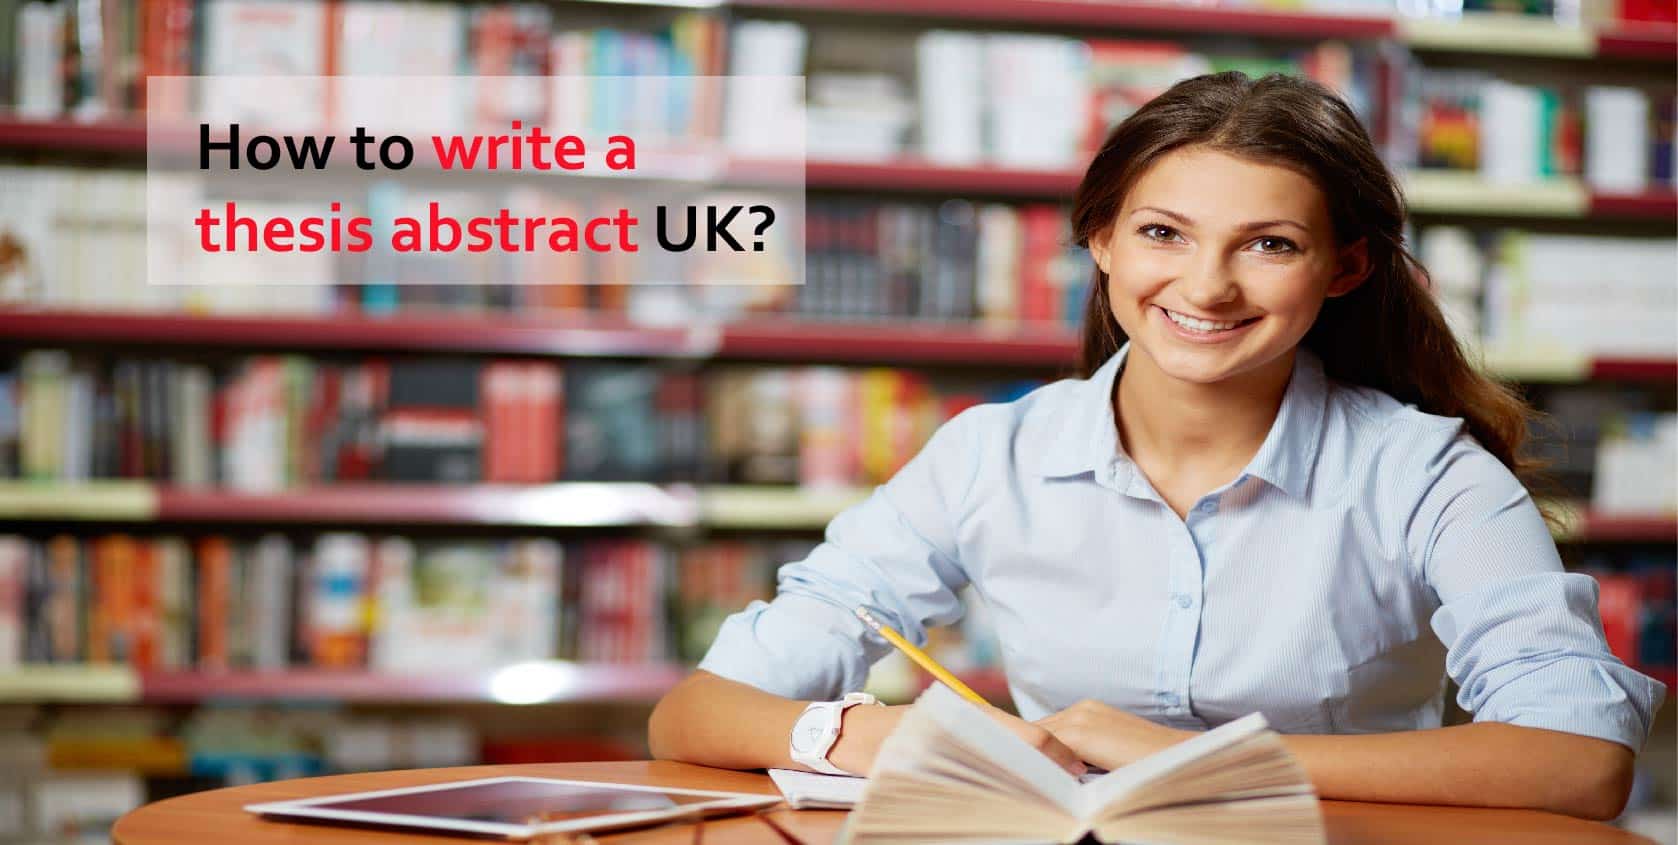 Dissertation abstracts uk